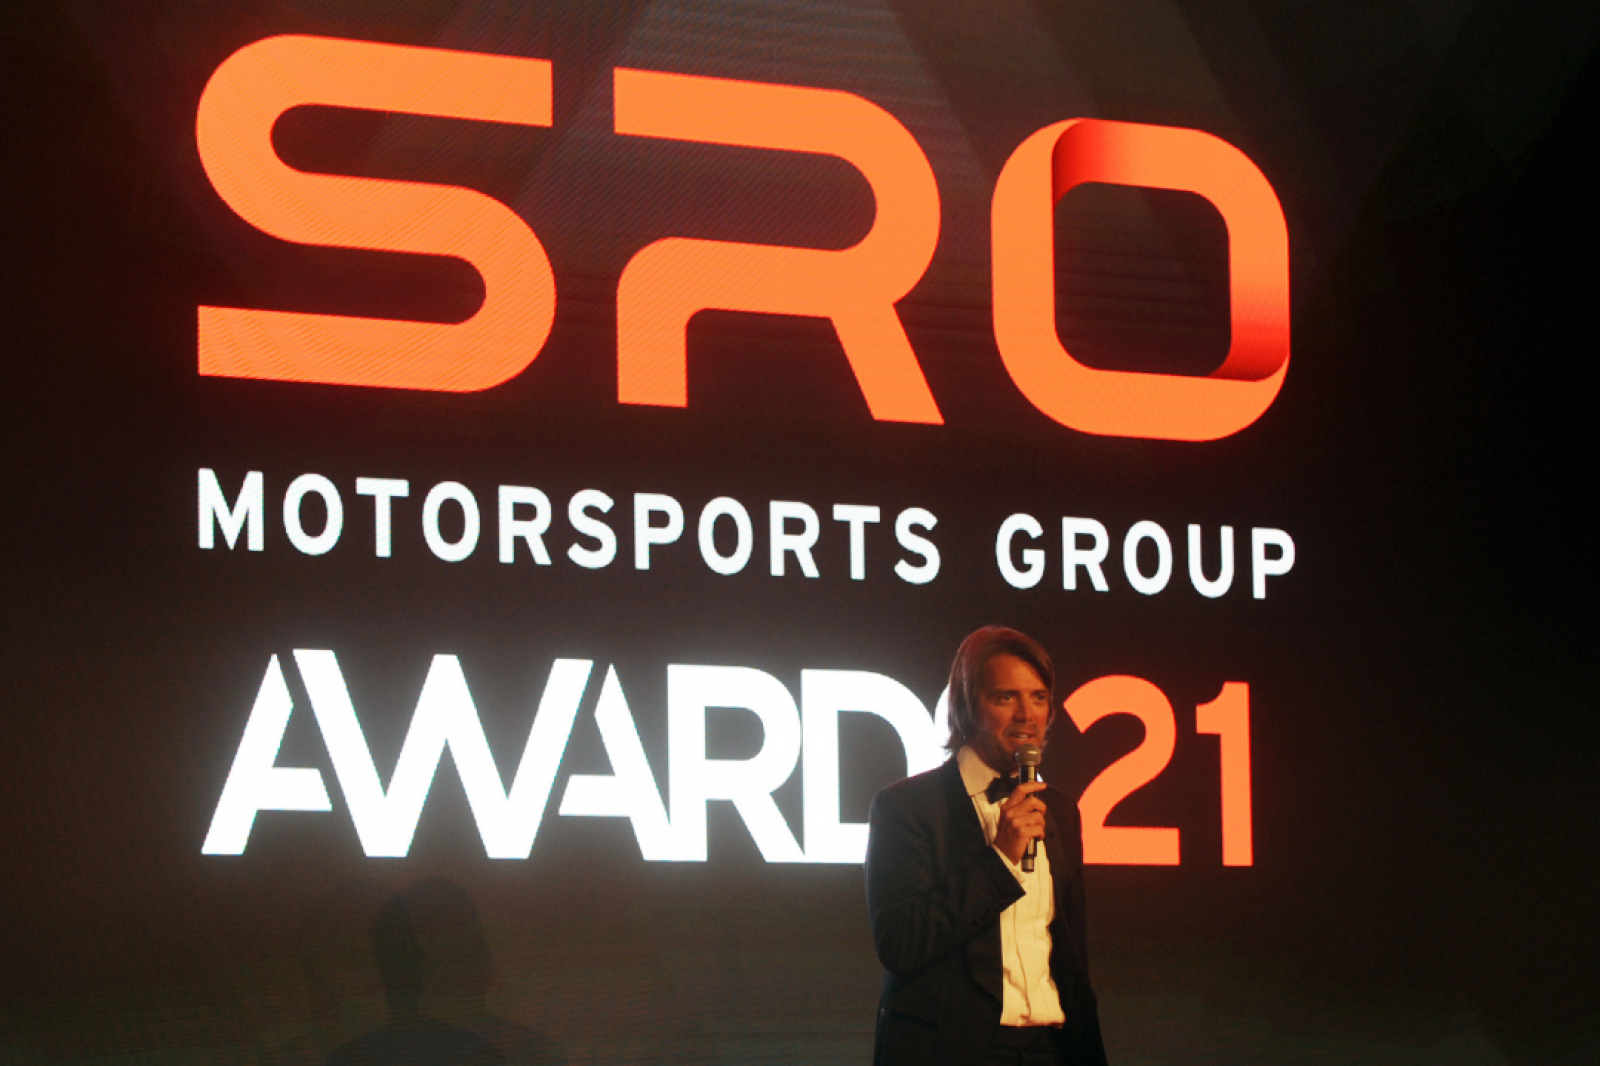 Stars of international GT racing celebrated at SRO Motorsports Group Awards in London